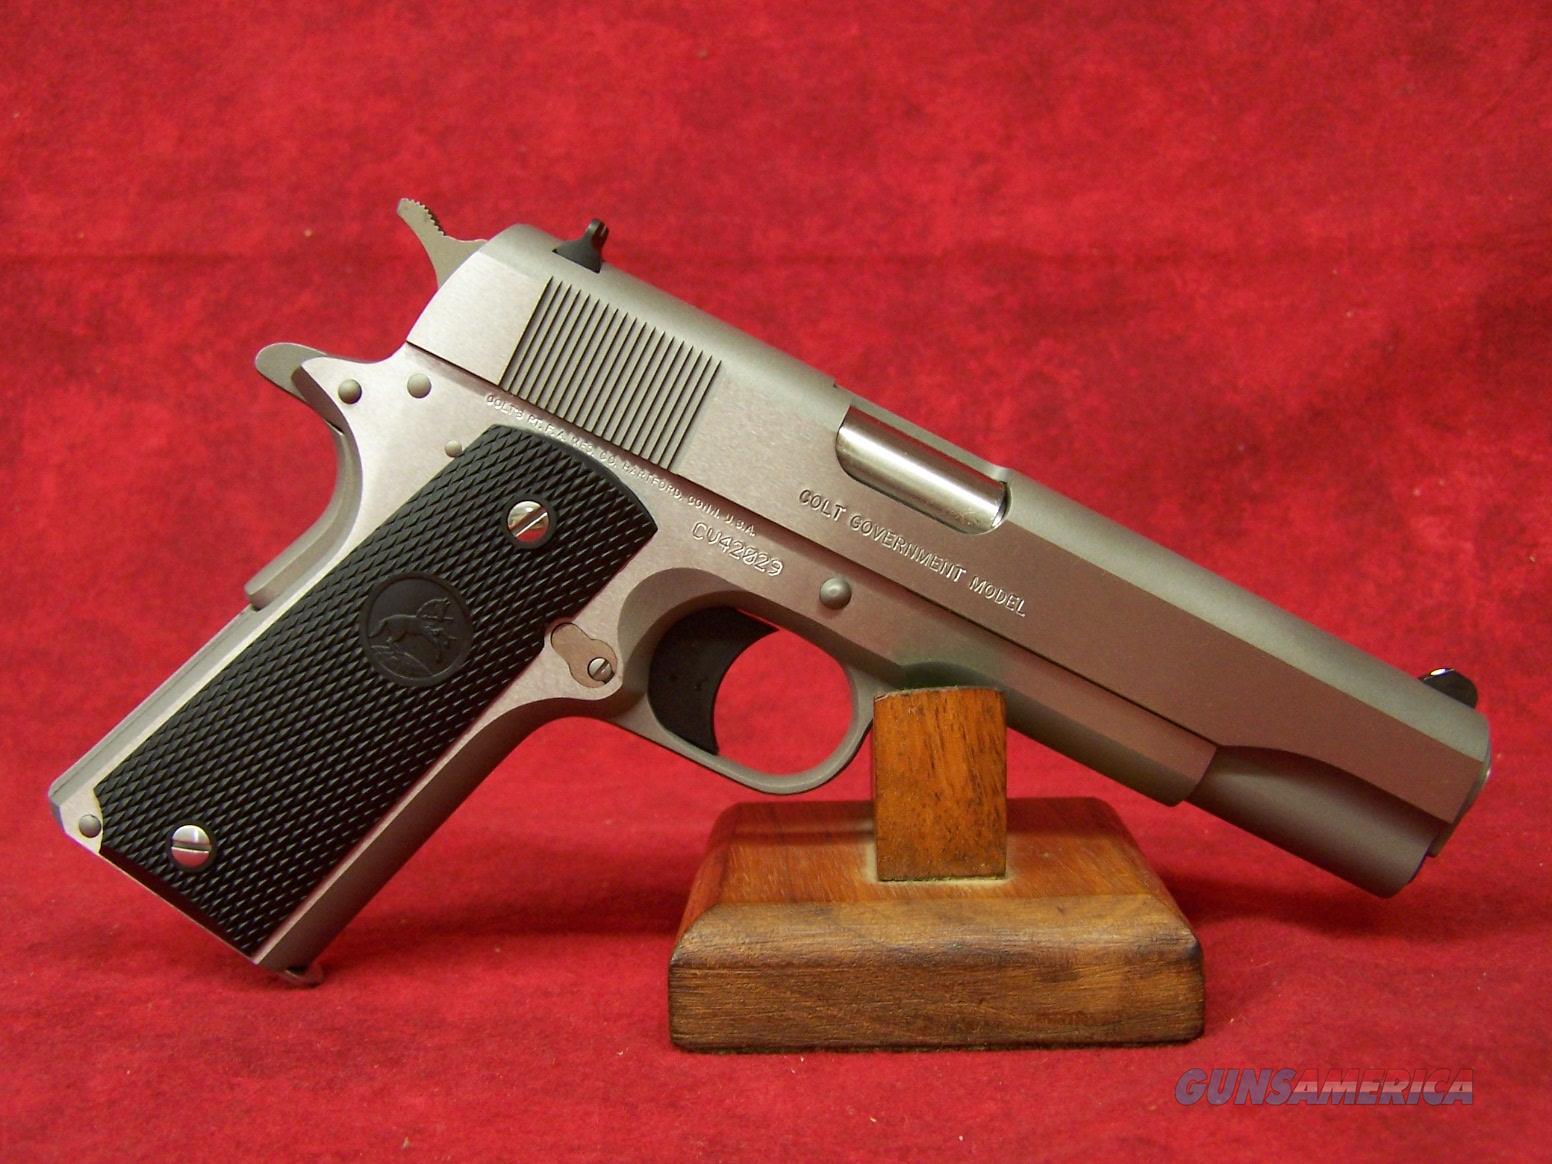 Colt 1991 Government Model 5 45acp For Sale At 956576207 5546